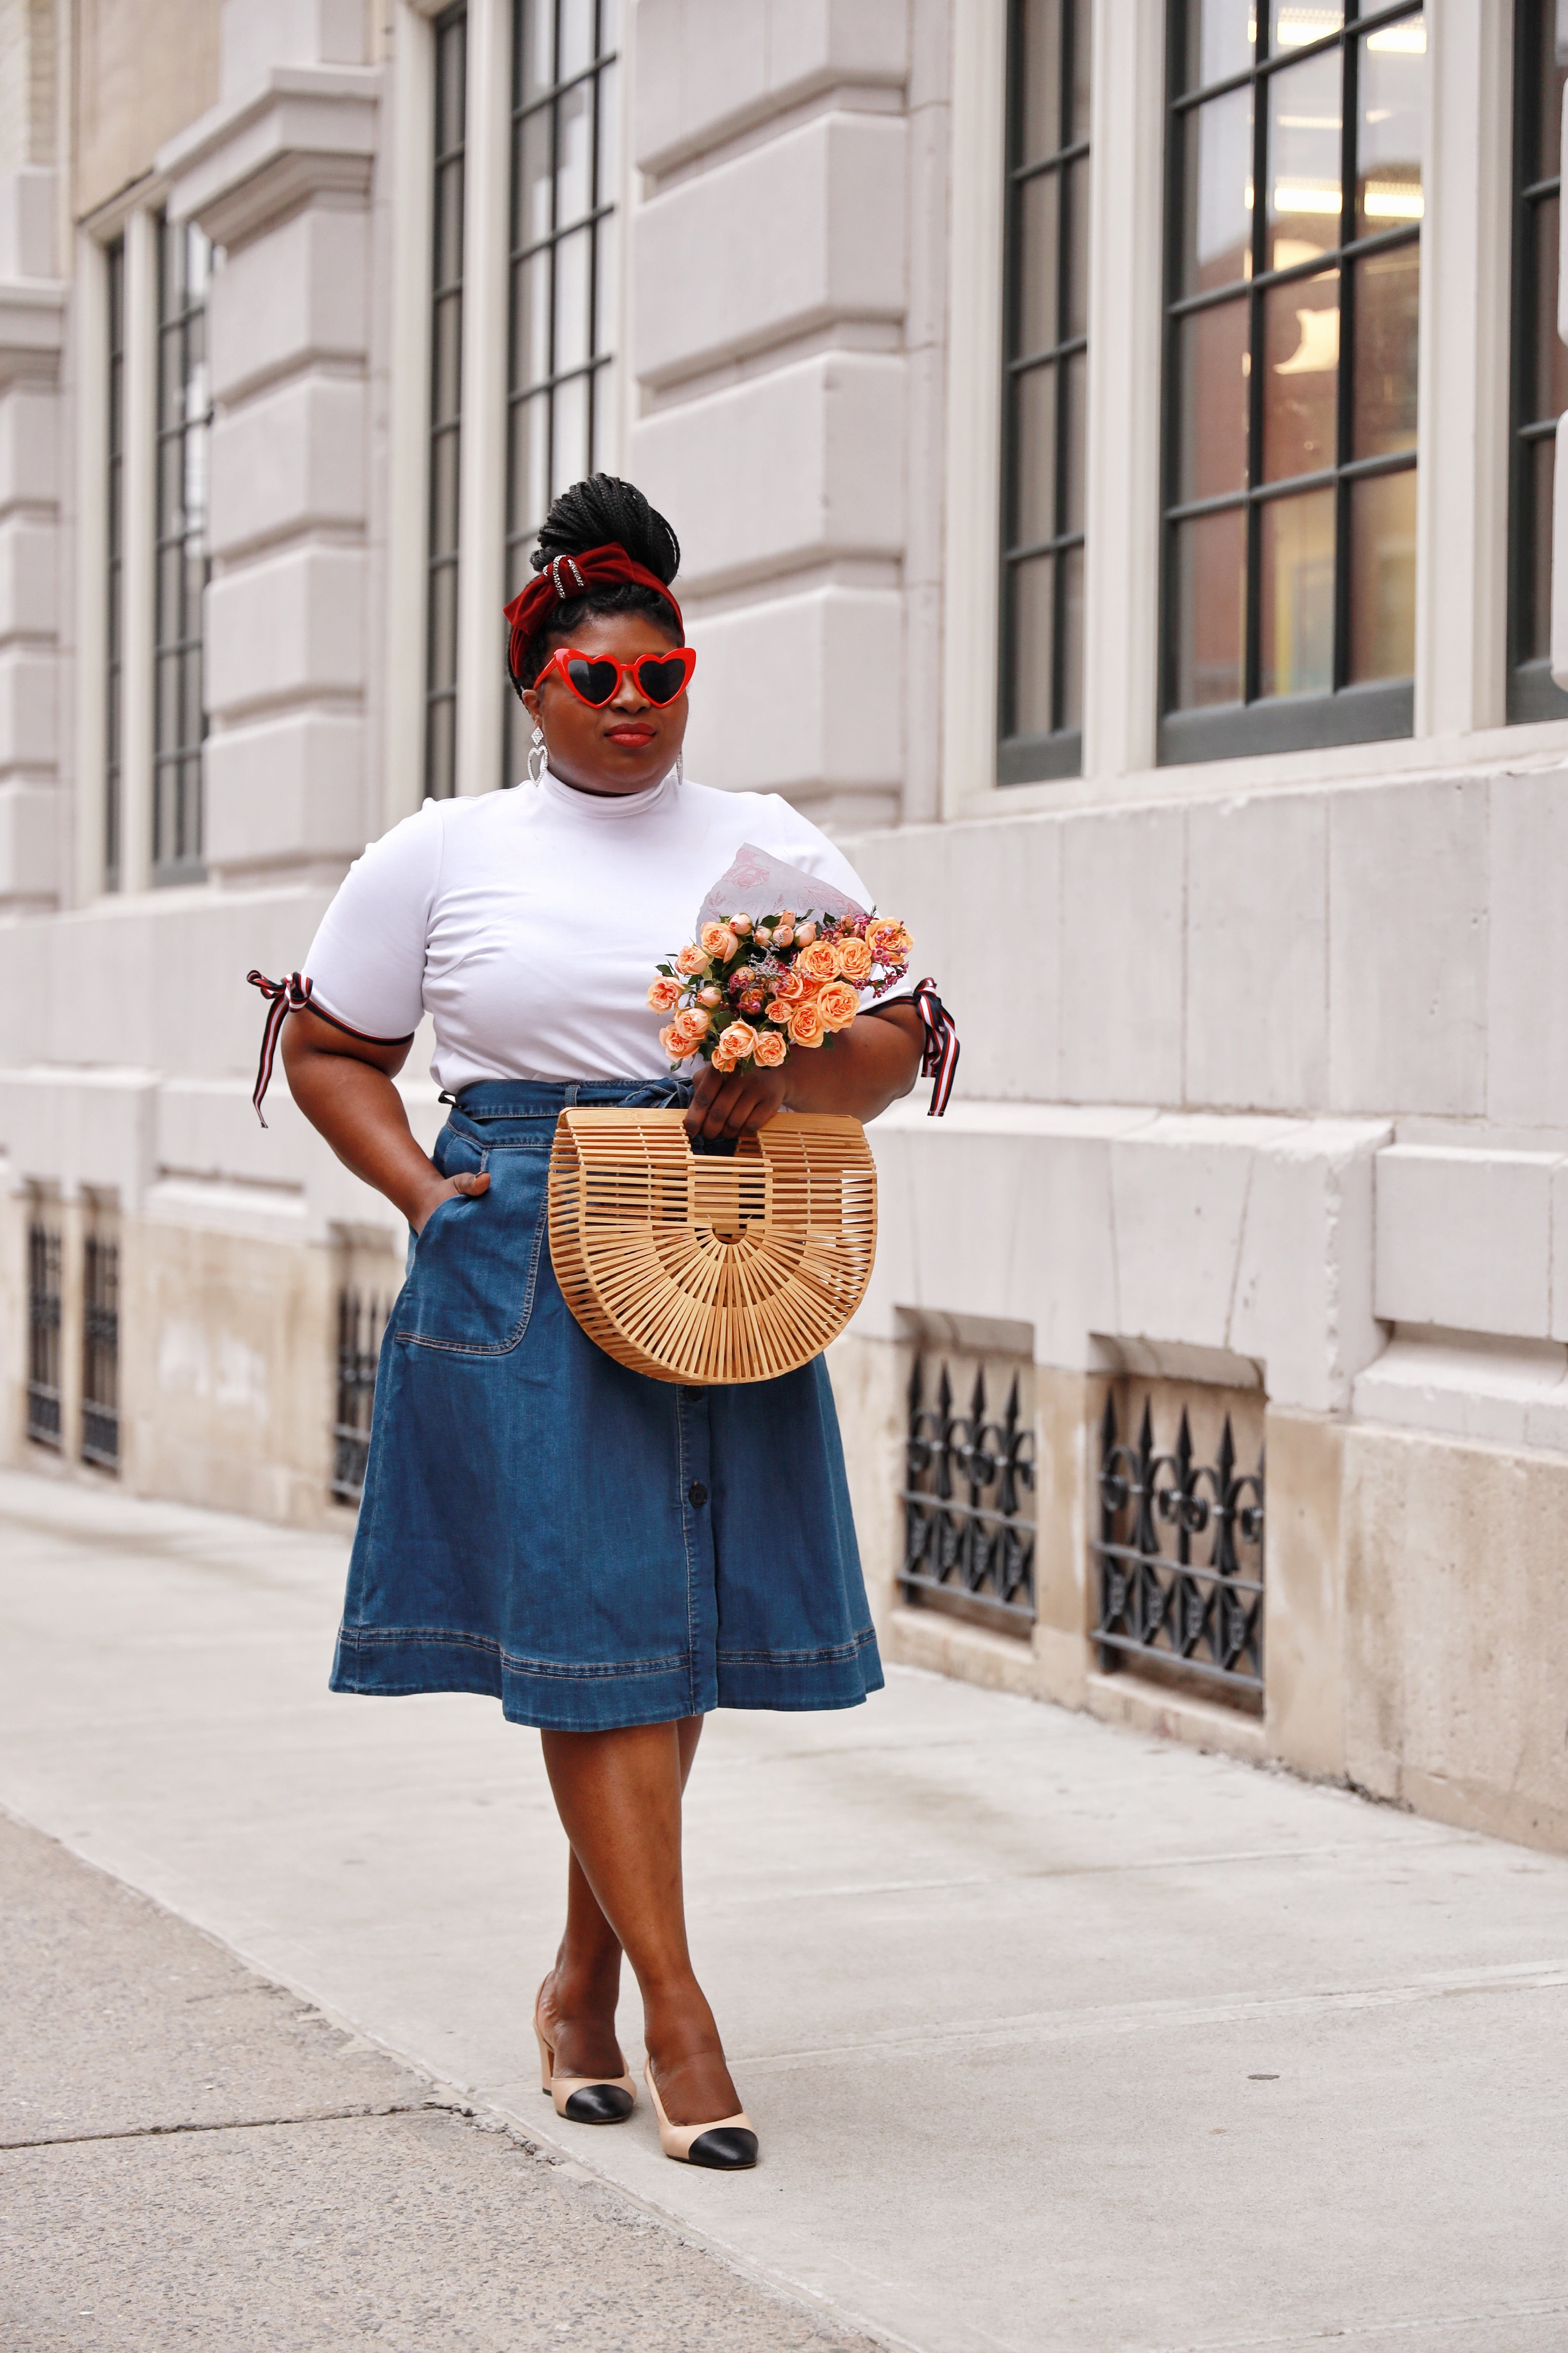 How to Style a Denim Skirt